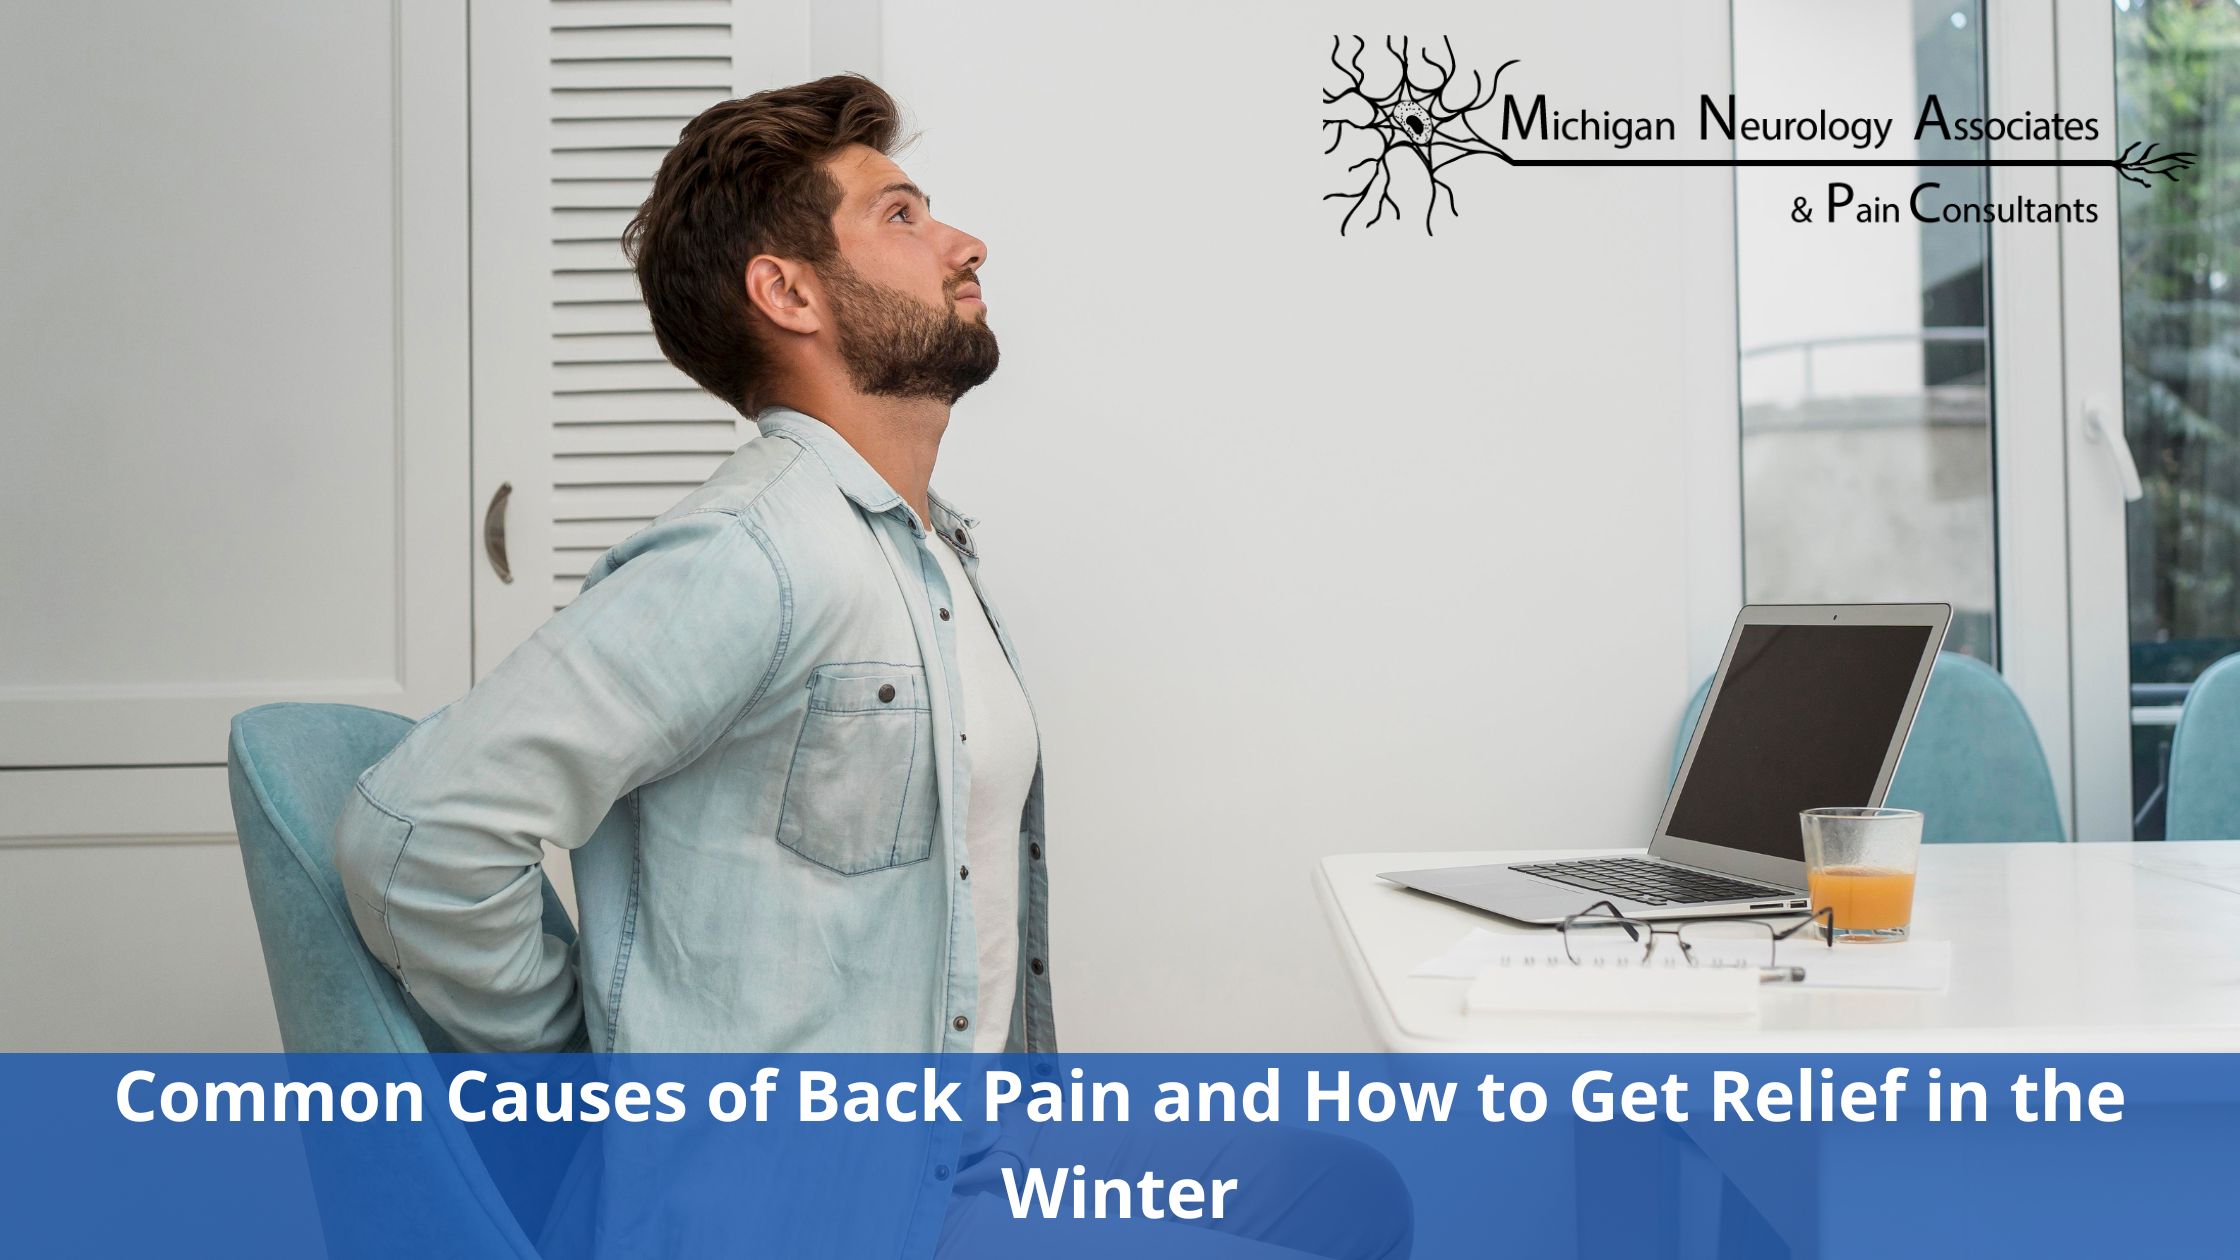 Common Causes of Back Pain and How to Get Relief in the Winter